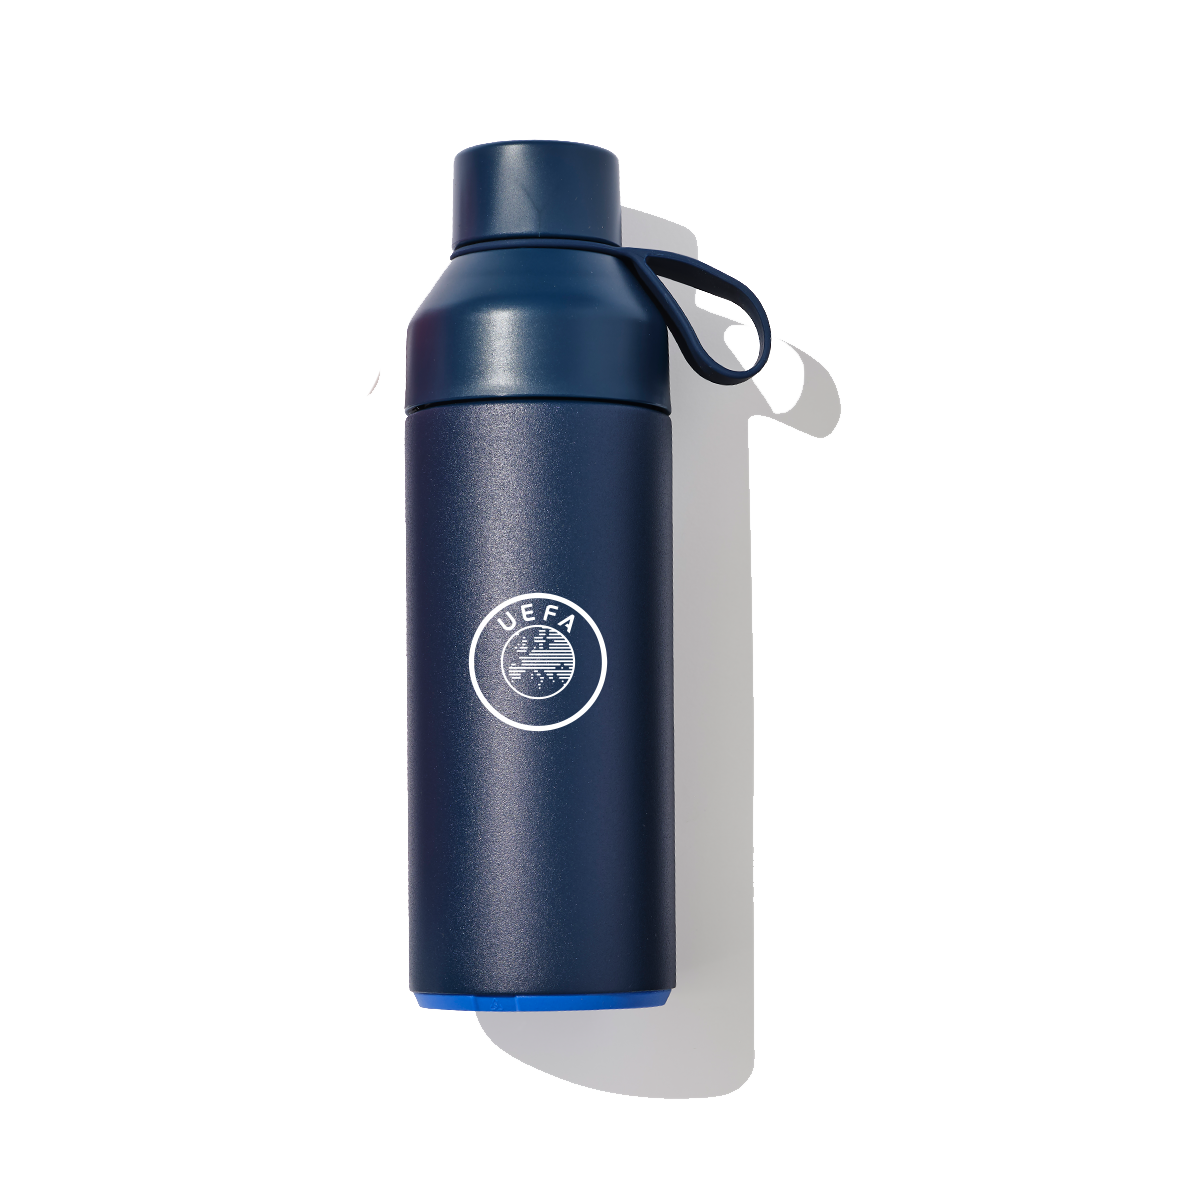 UEFA_Ocean_bottle_Blue_1200_371d899a-c57d-4b3a-870e-e8f8f8a06cc1.png